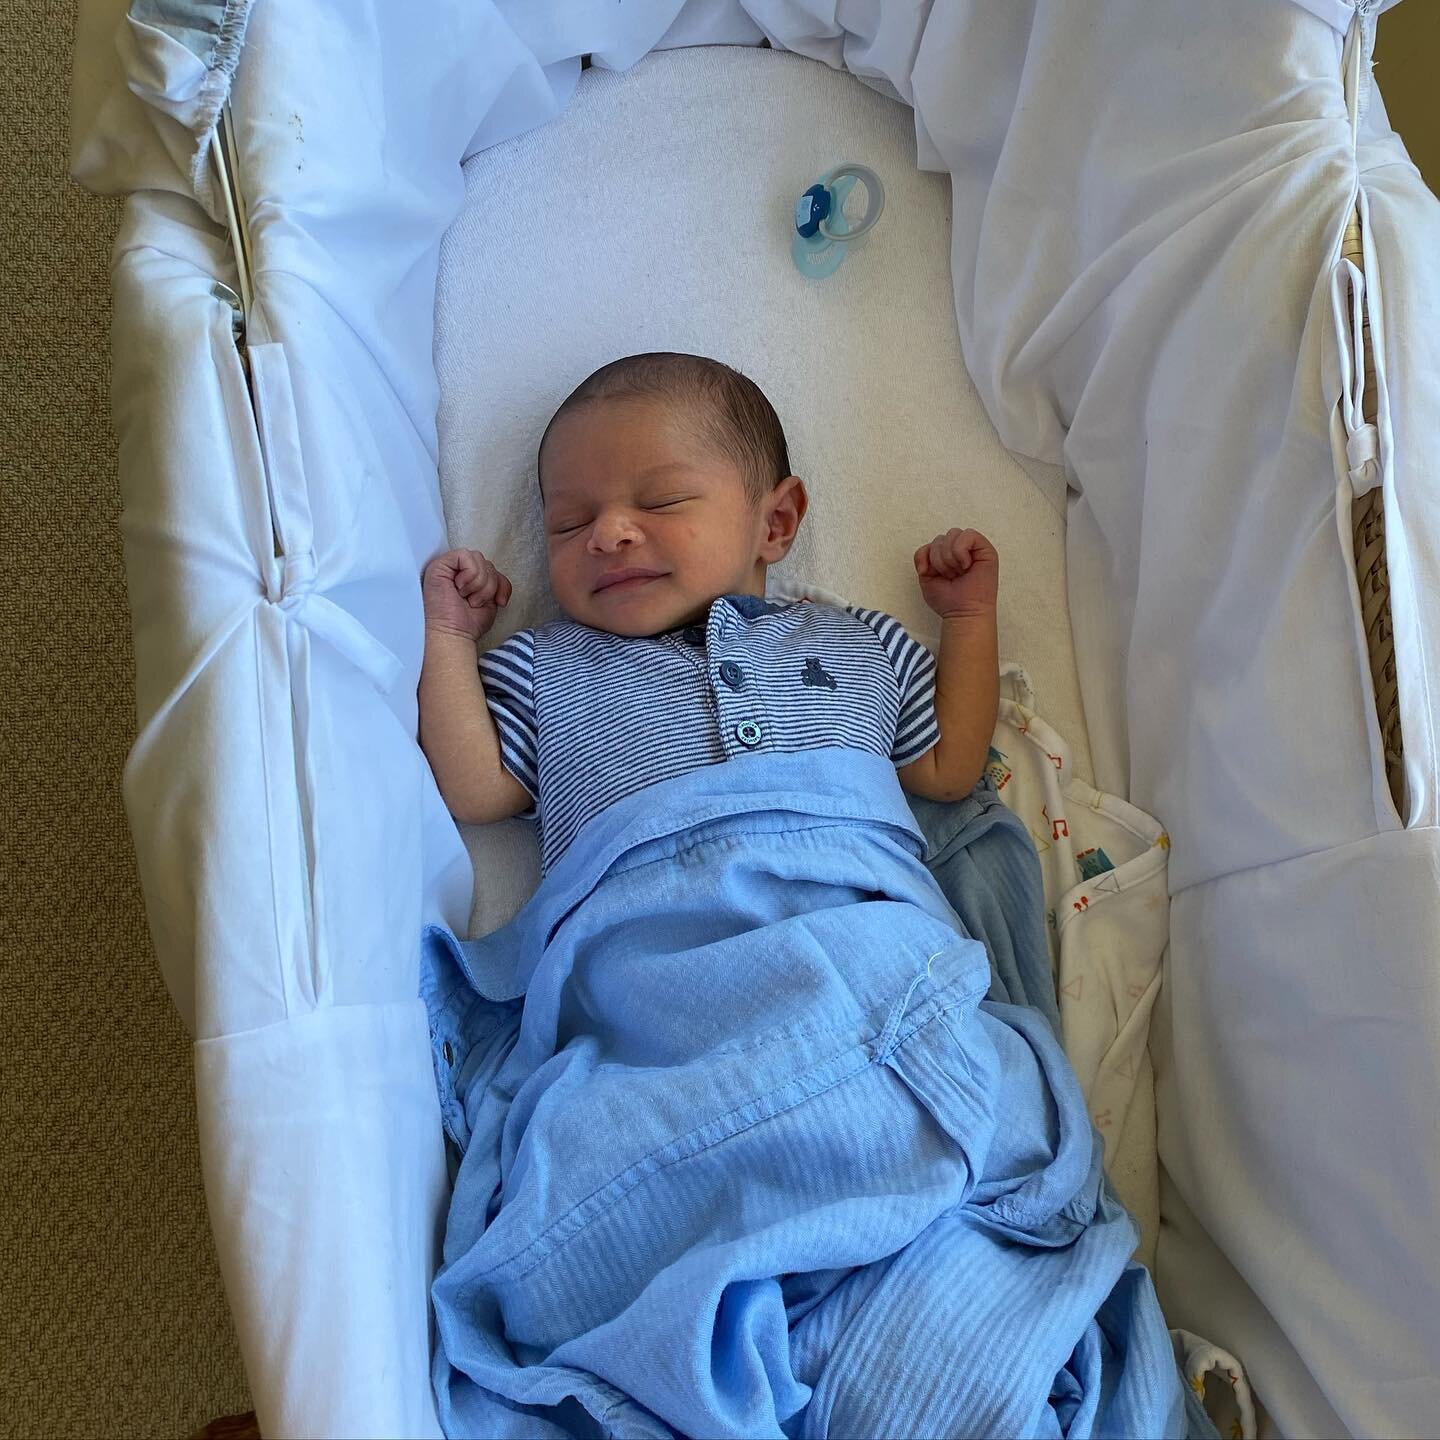 Here goes&hellip;.

Baby Nico 💙 was born at home on 17.06.21 weighing 6lbs 11oz. The birth was amazing and went just as planned (apart from him arriving before the midwives).

He had a short spell in hospital for Jaundice but is doing really well no